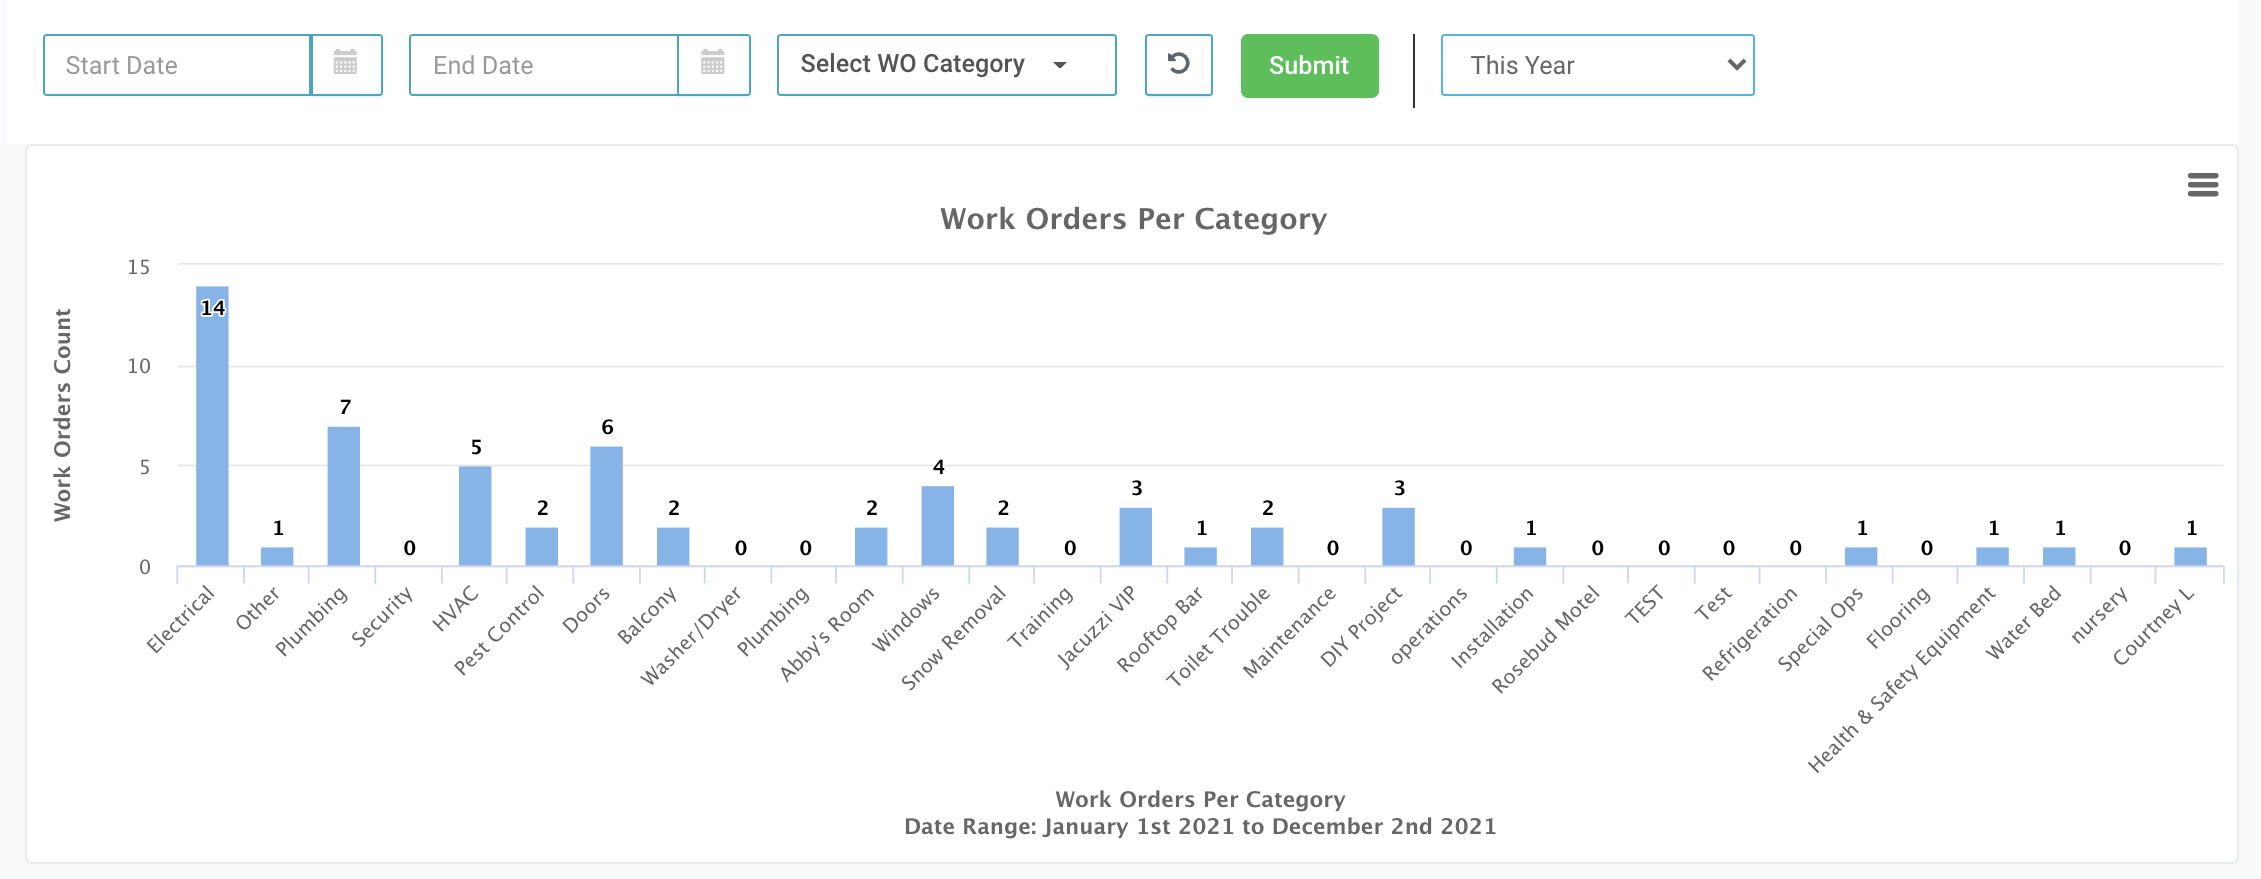 work_orders_per_category.png